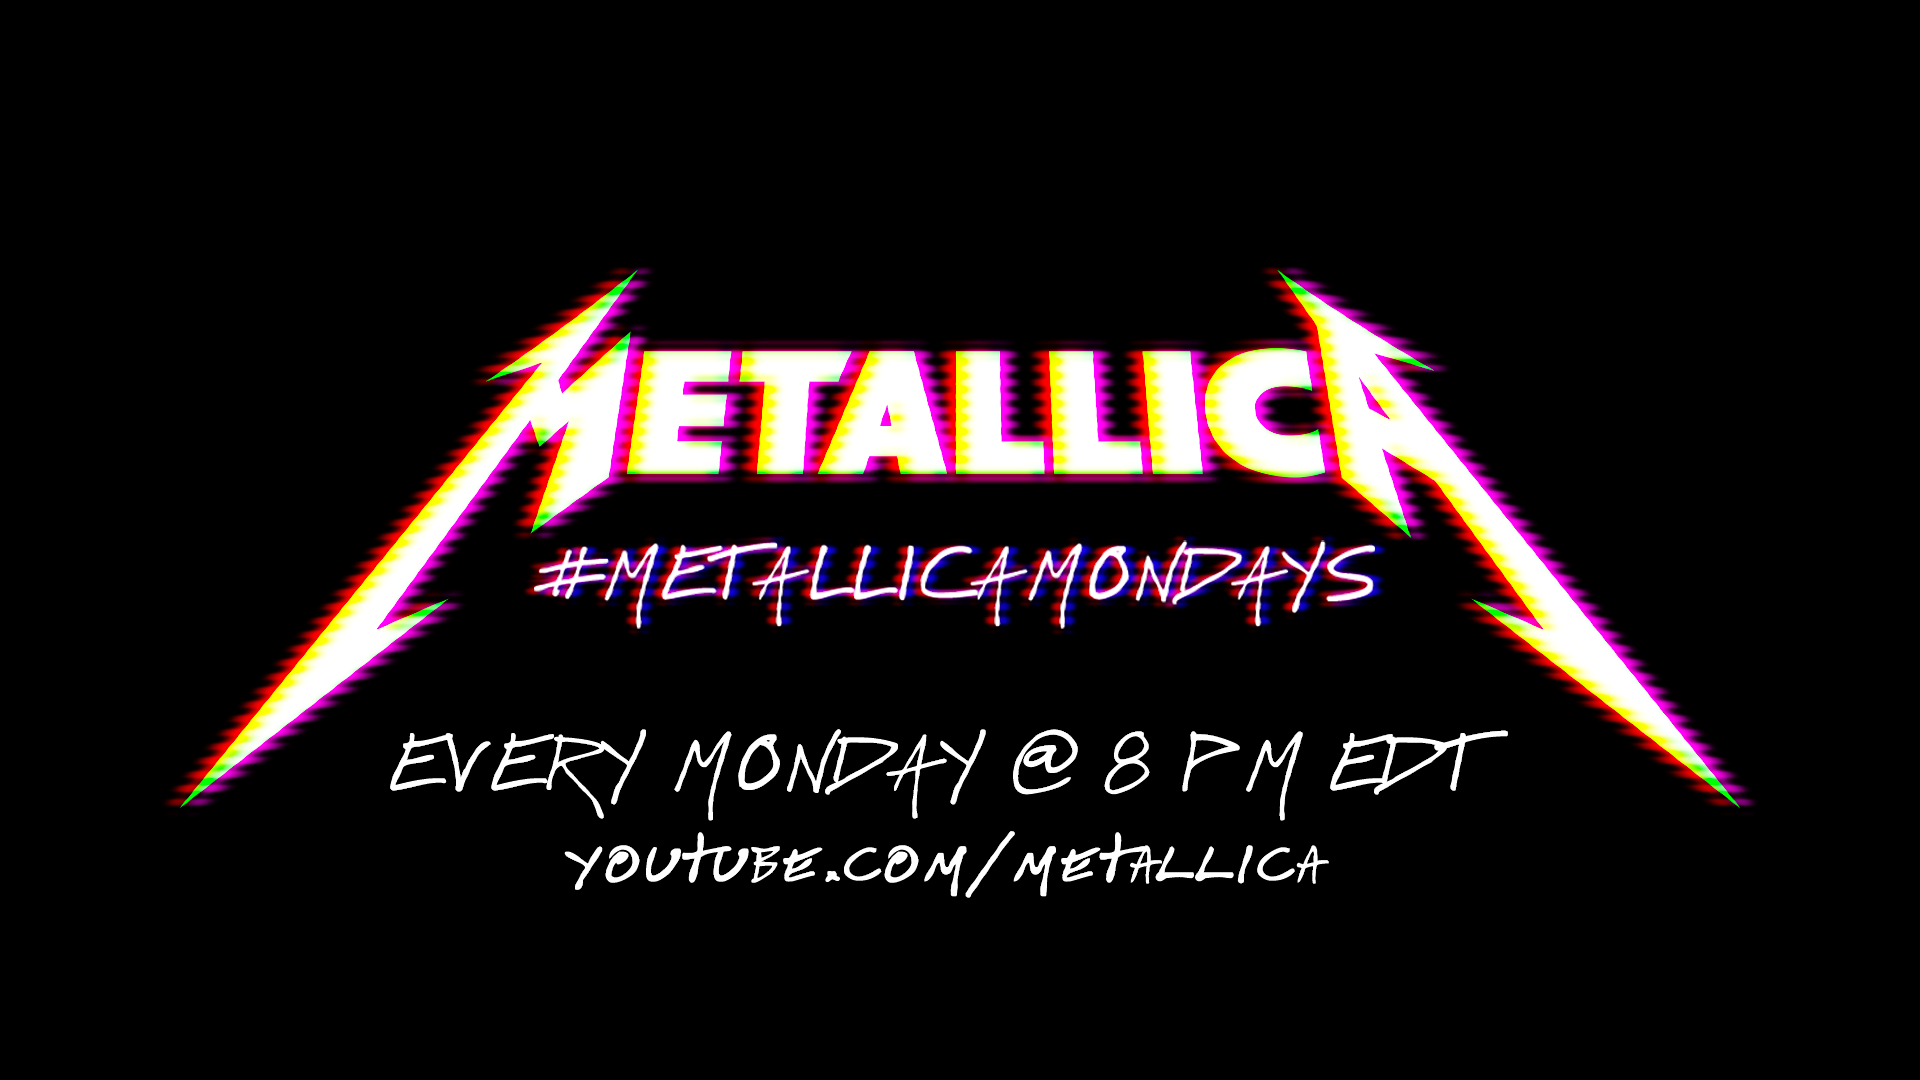 Subscribe to Metallica''s YouTube Channel